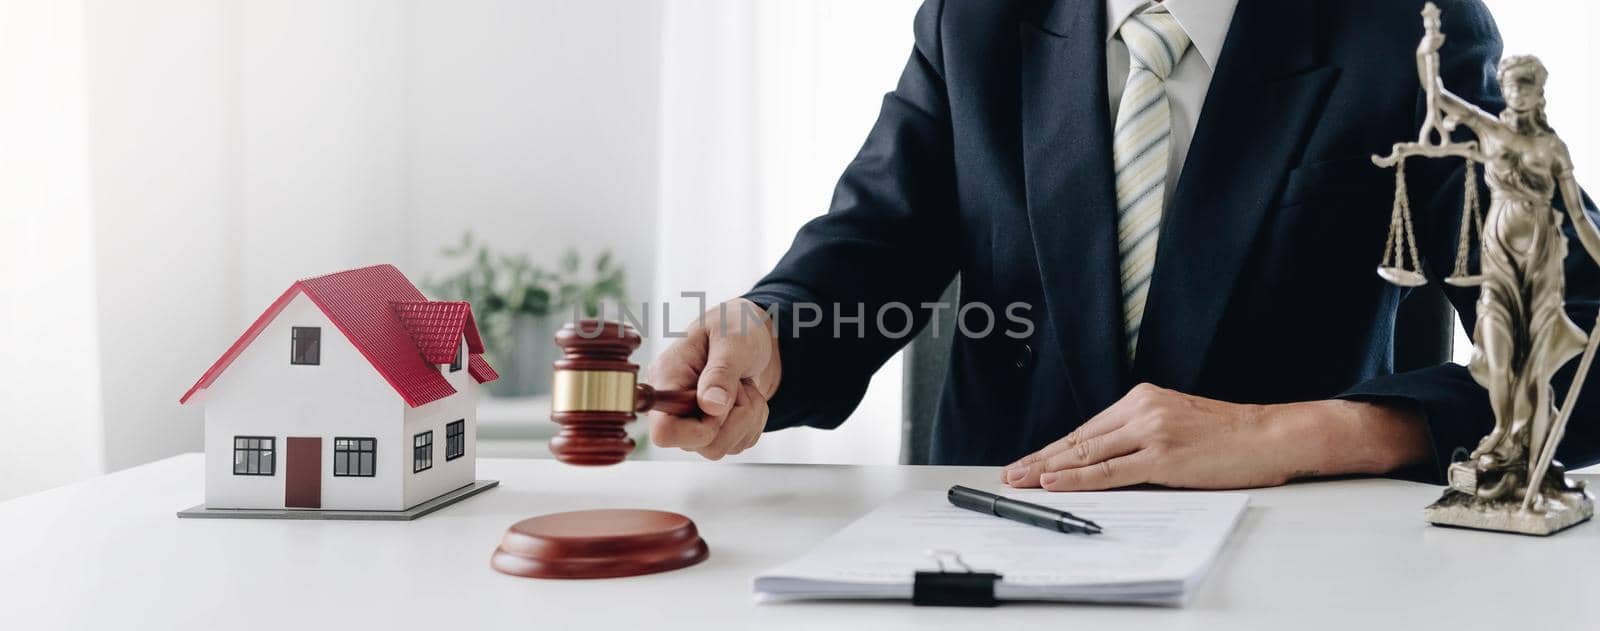 Stern judge with paper document pronouncing sentence in a court of law. Judge finds the accused guilty, passes judgement and rules case closed. Hand holding gavel and hitting sound block in close-up.